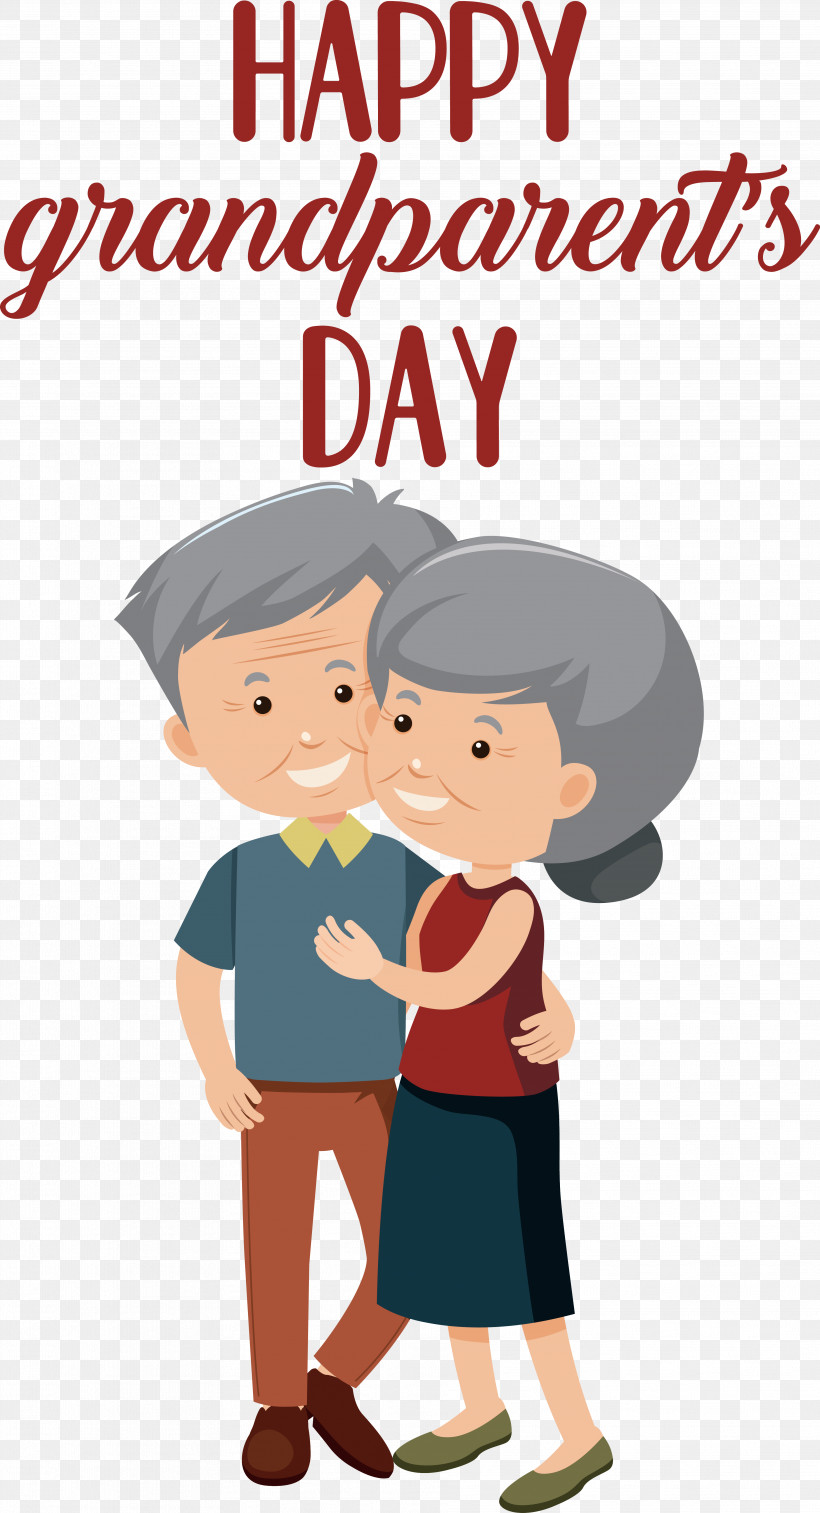 Grandparents Day, PNG, 3753x6925px, Grandparents Day, Grandfathers Day, Grandmothers Day Download Free